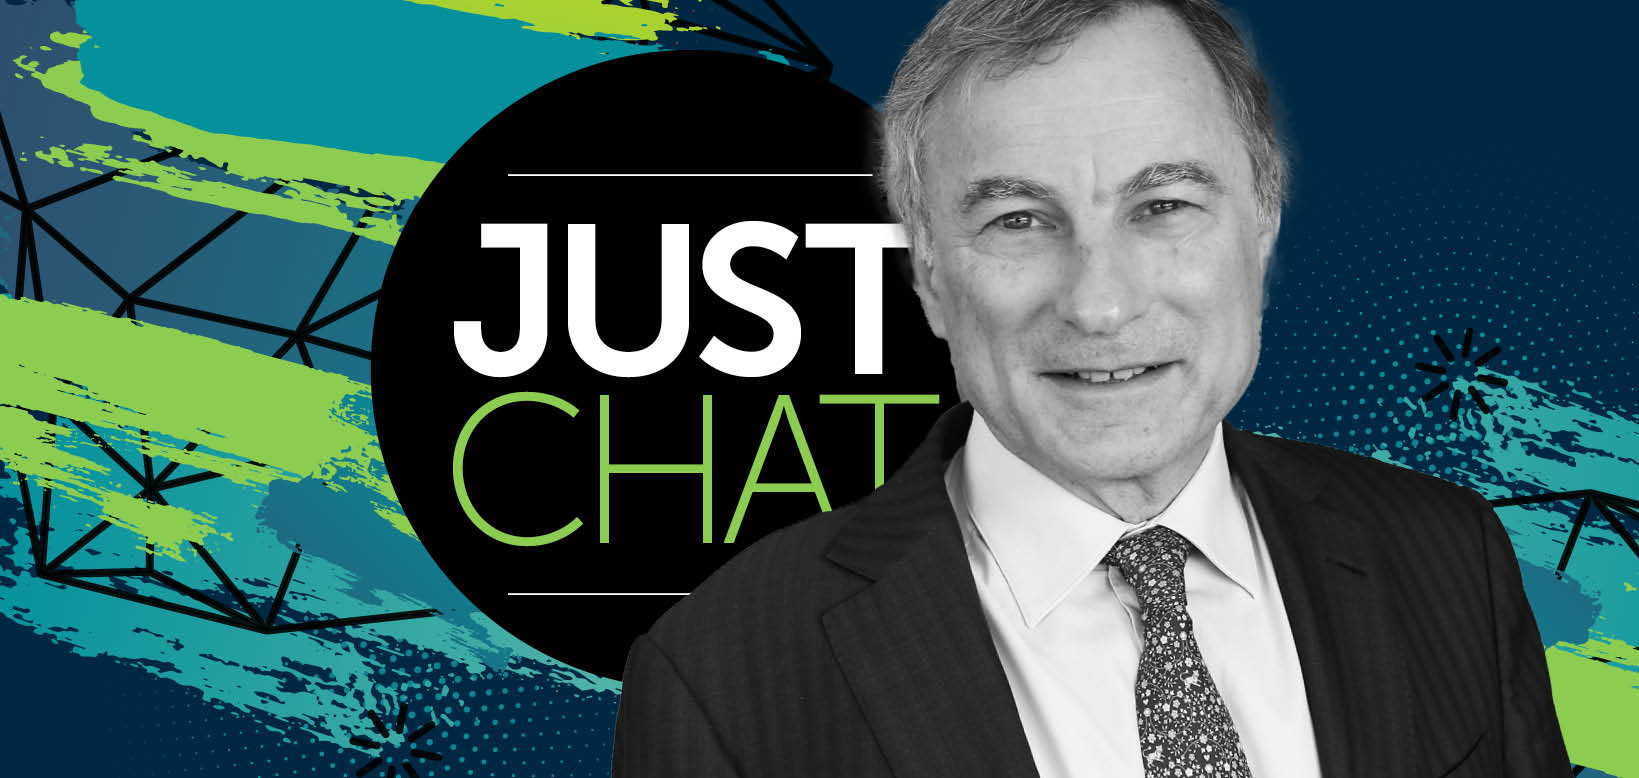 Just Chat - Michael Coutts-Trotter - Law Society Journal